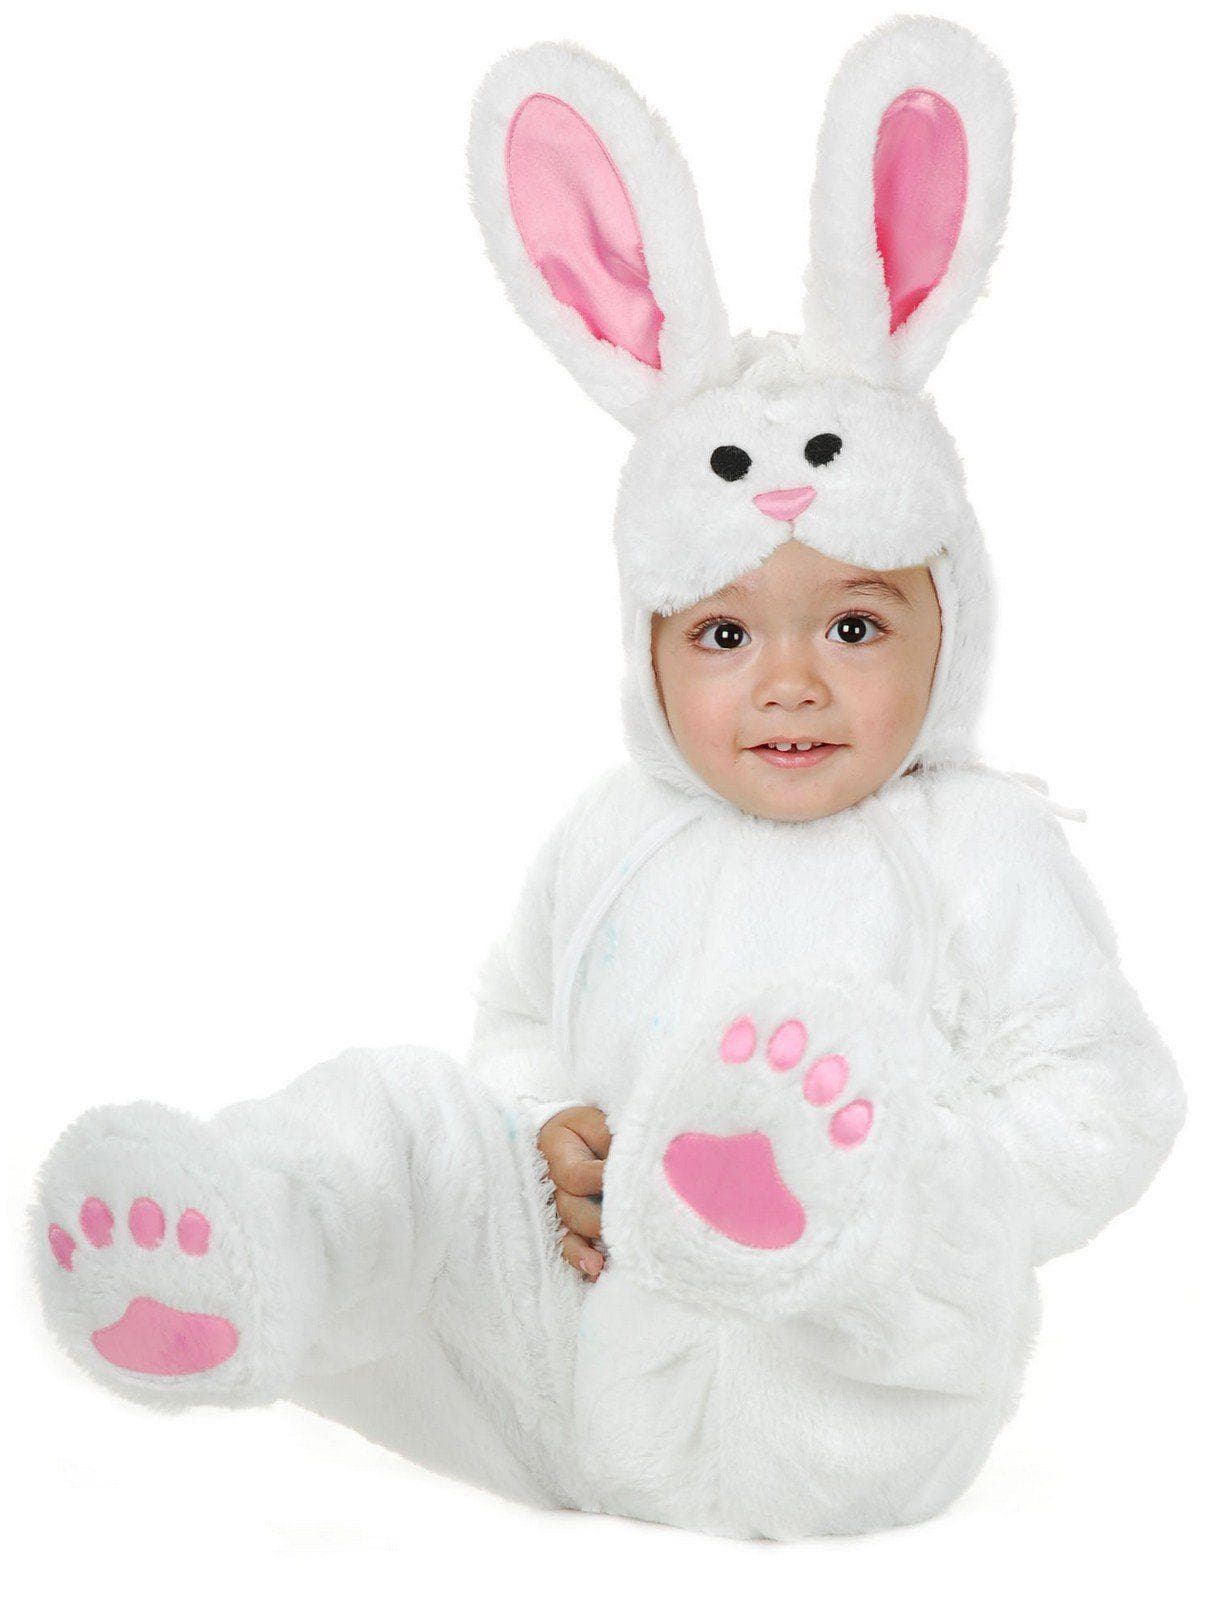 Baby/Toddler Little Bunny Costume - costumes.com